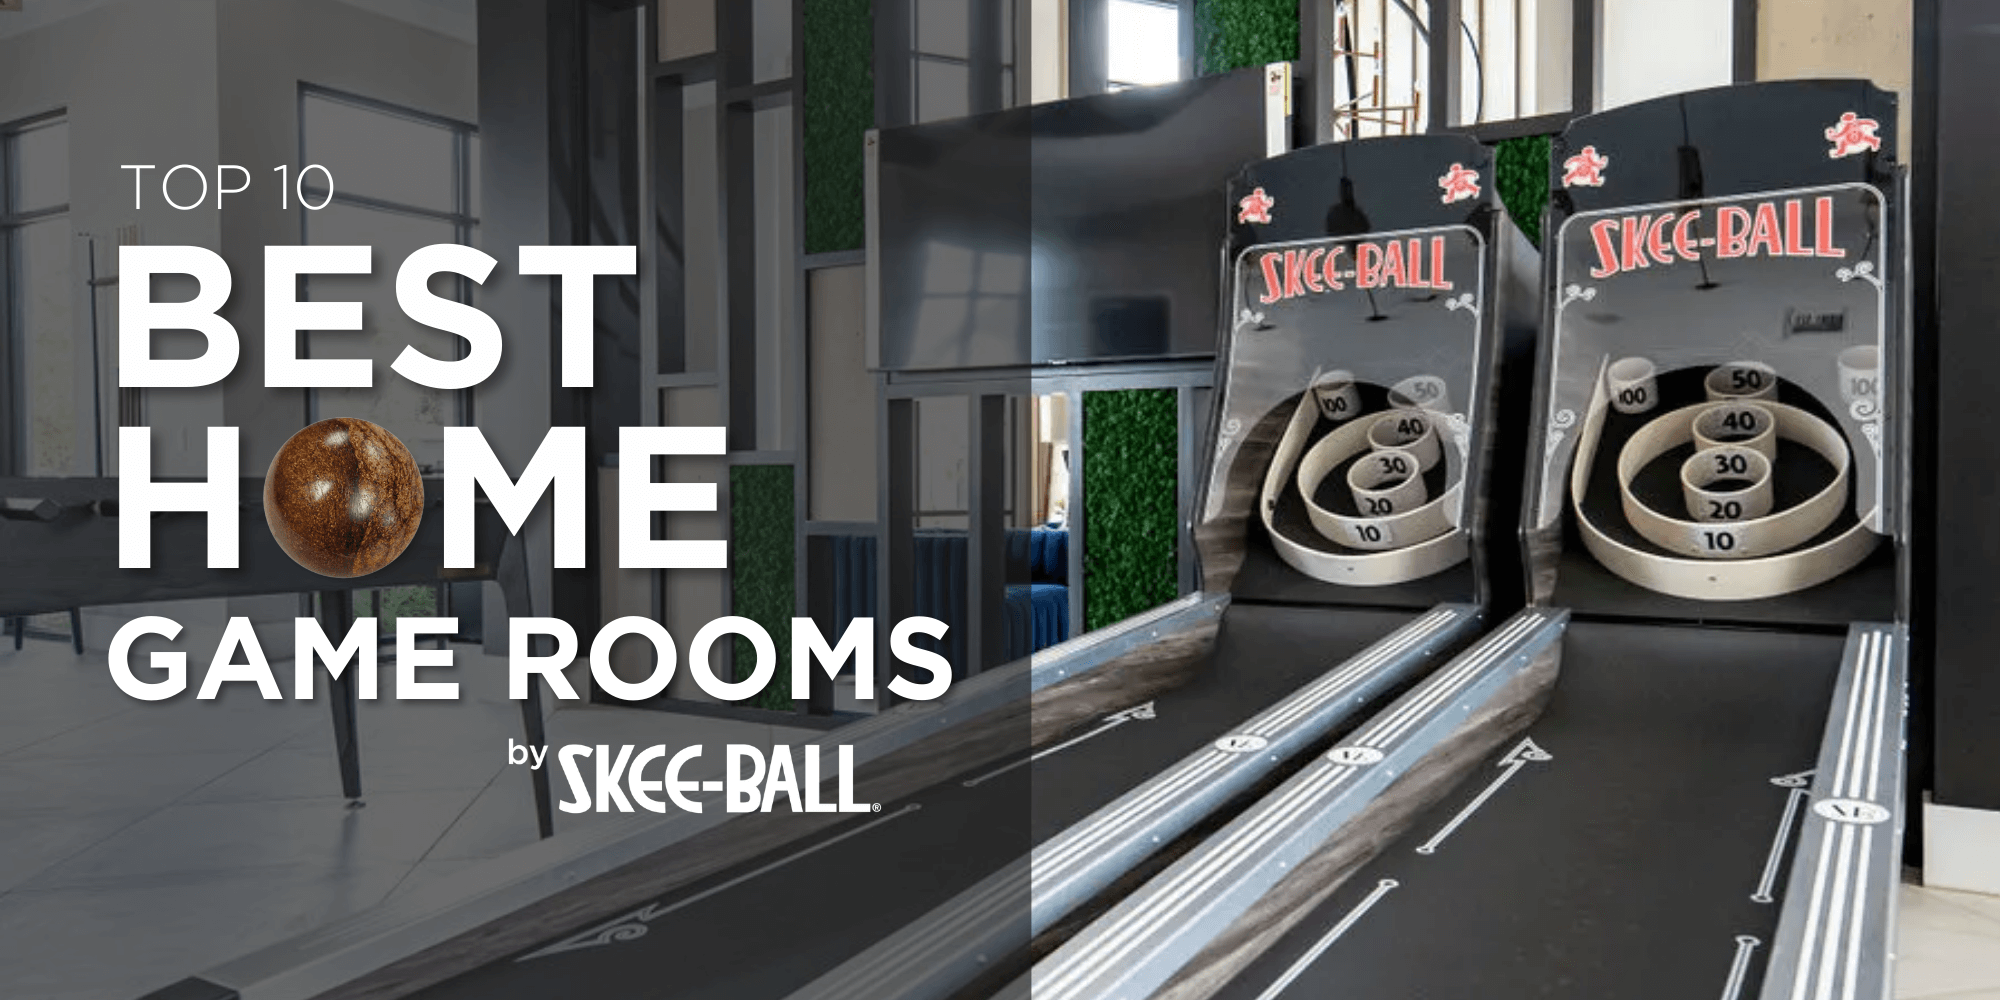 Top 10 Best Home Game Rooms By Skee-Ball